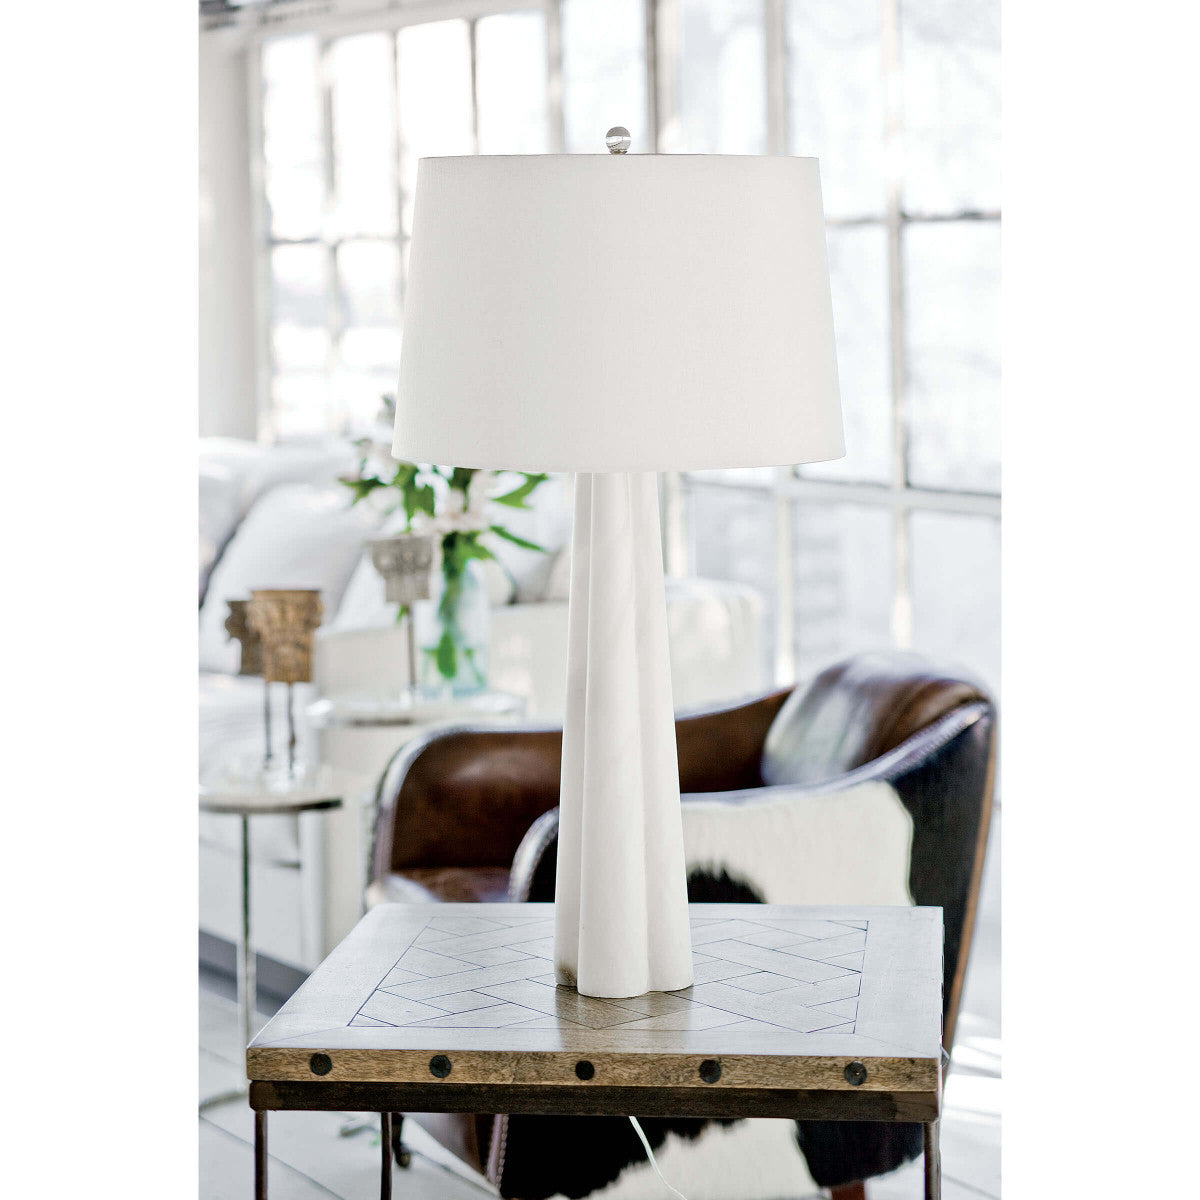 table lamp featured on side table